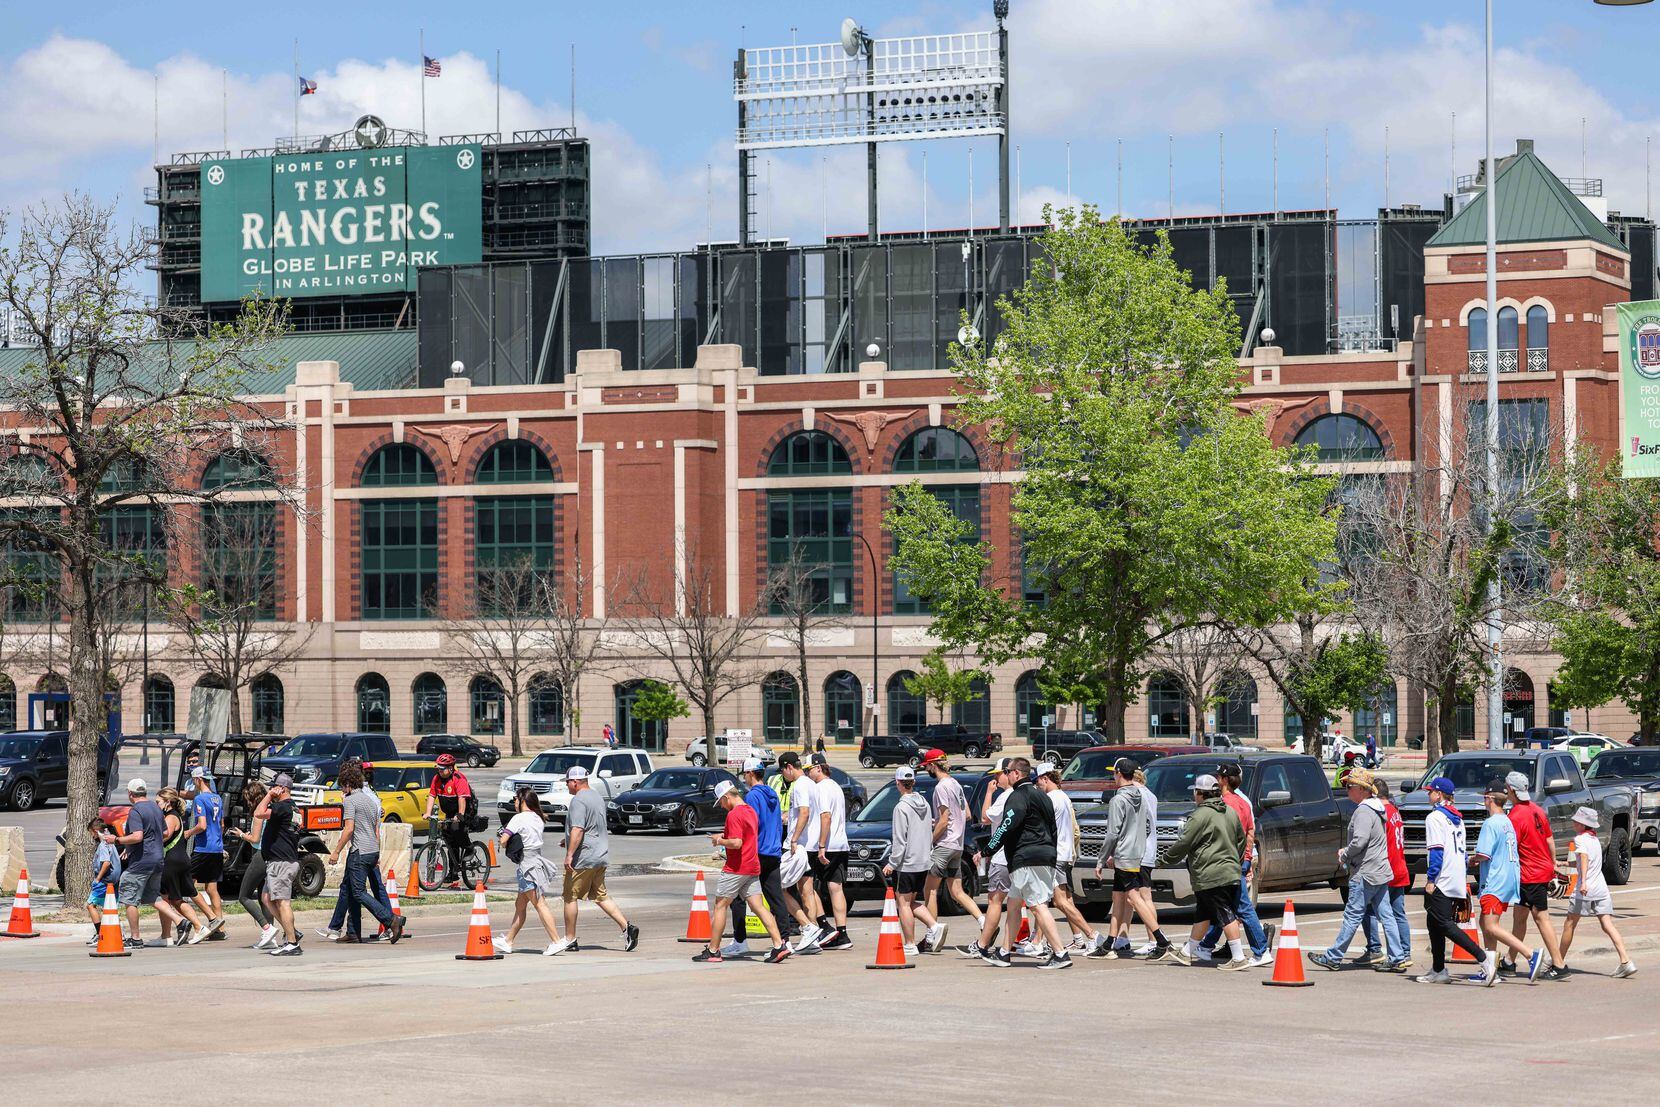 Fans walk to the Globe Life Field entrance to attend the game between Texas Rangers and Toronto Blue Jays on opening day in Arlington, Texas on Monday, April 5, 2021. (Lola Gomez/The Dallas Morning News)